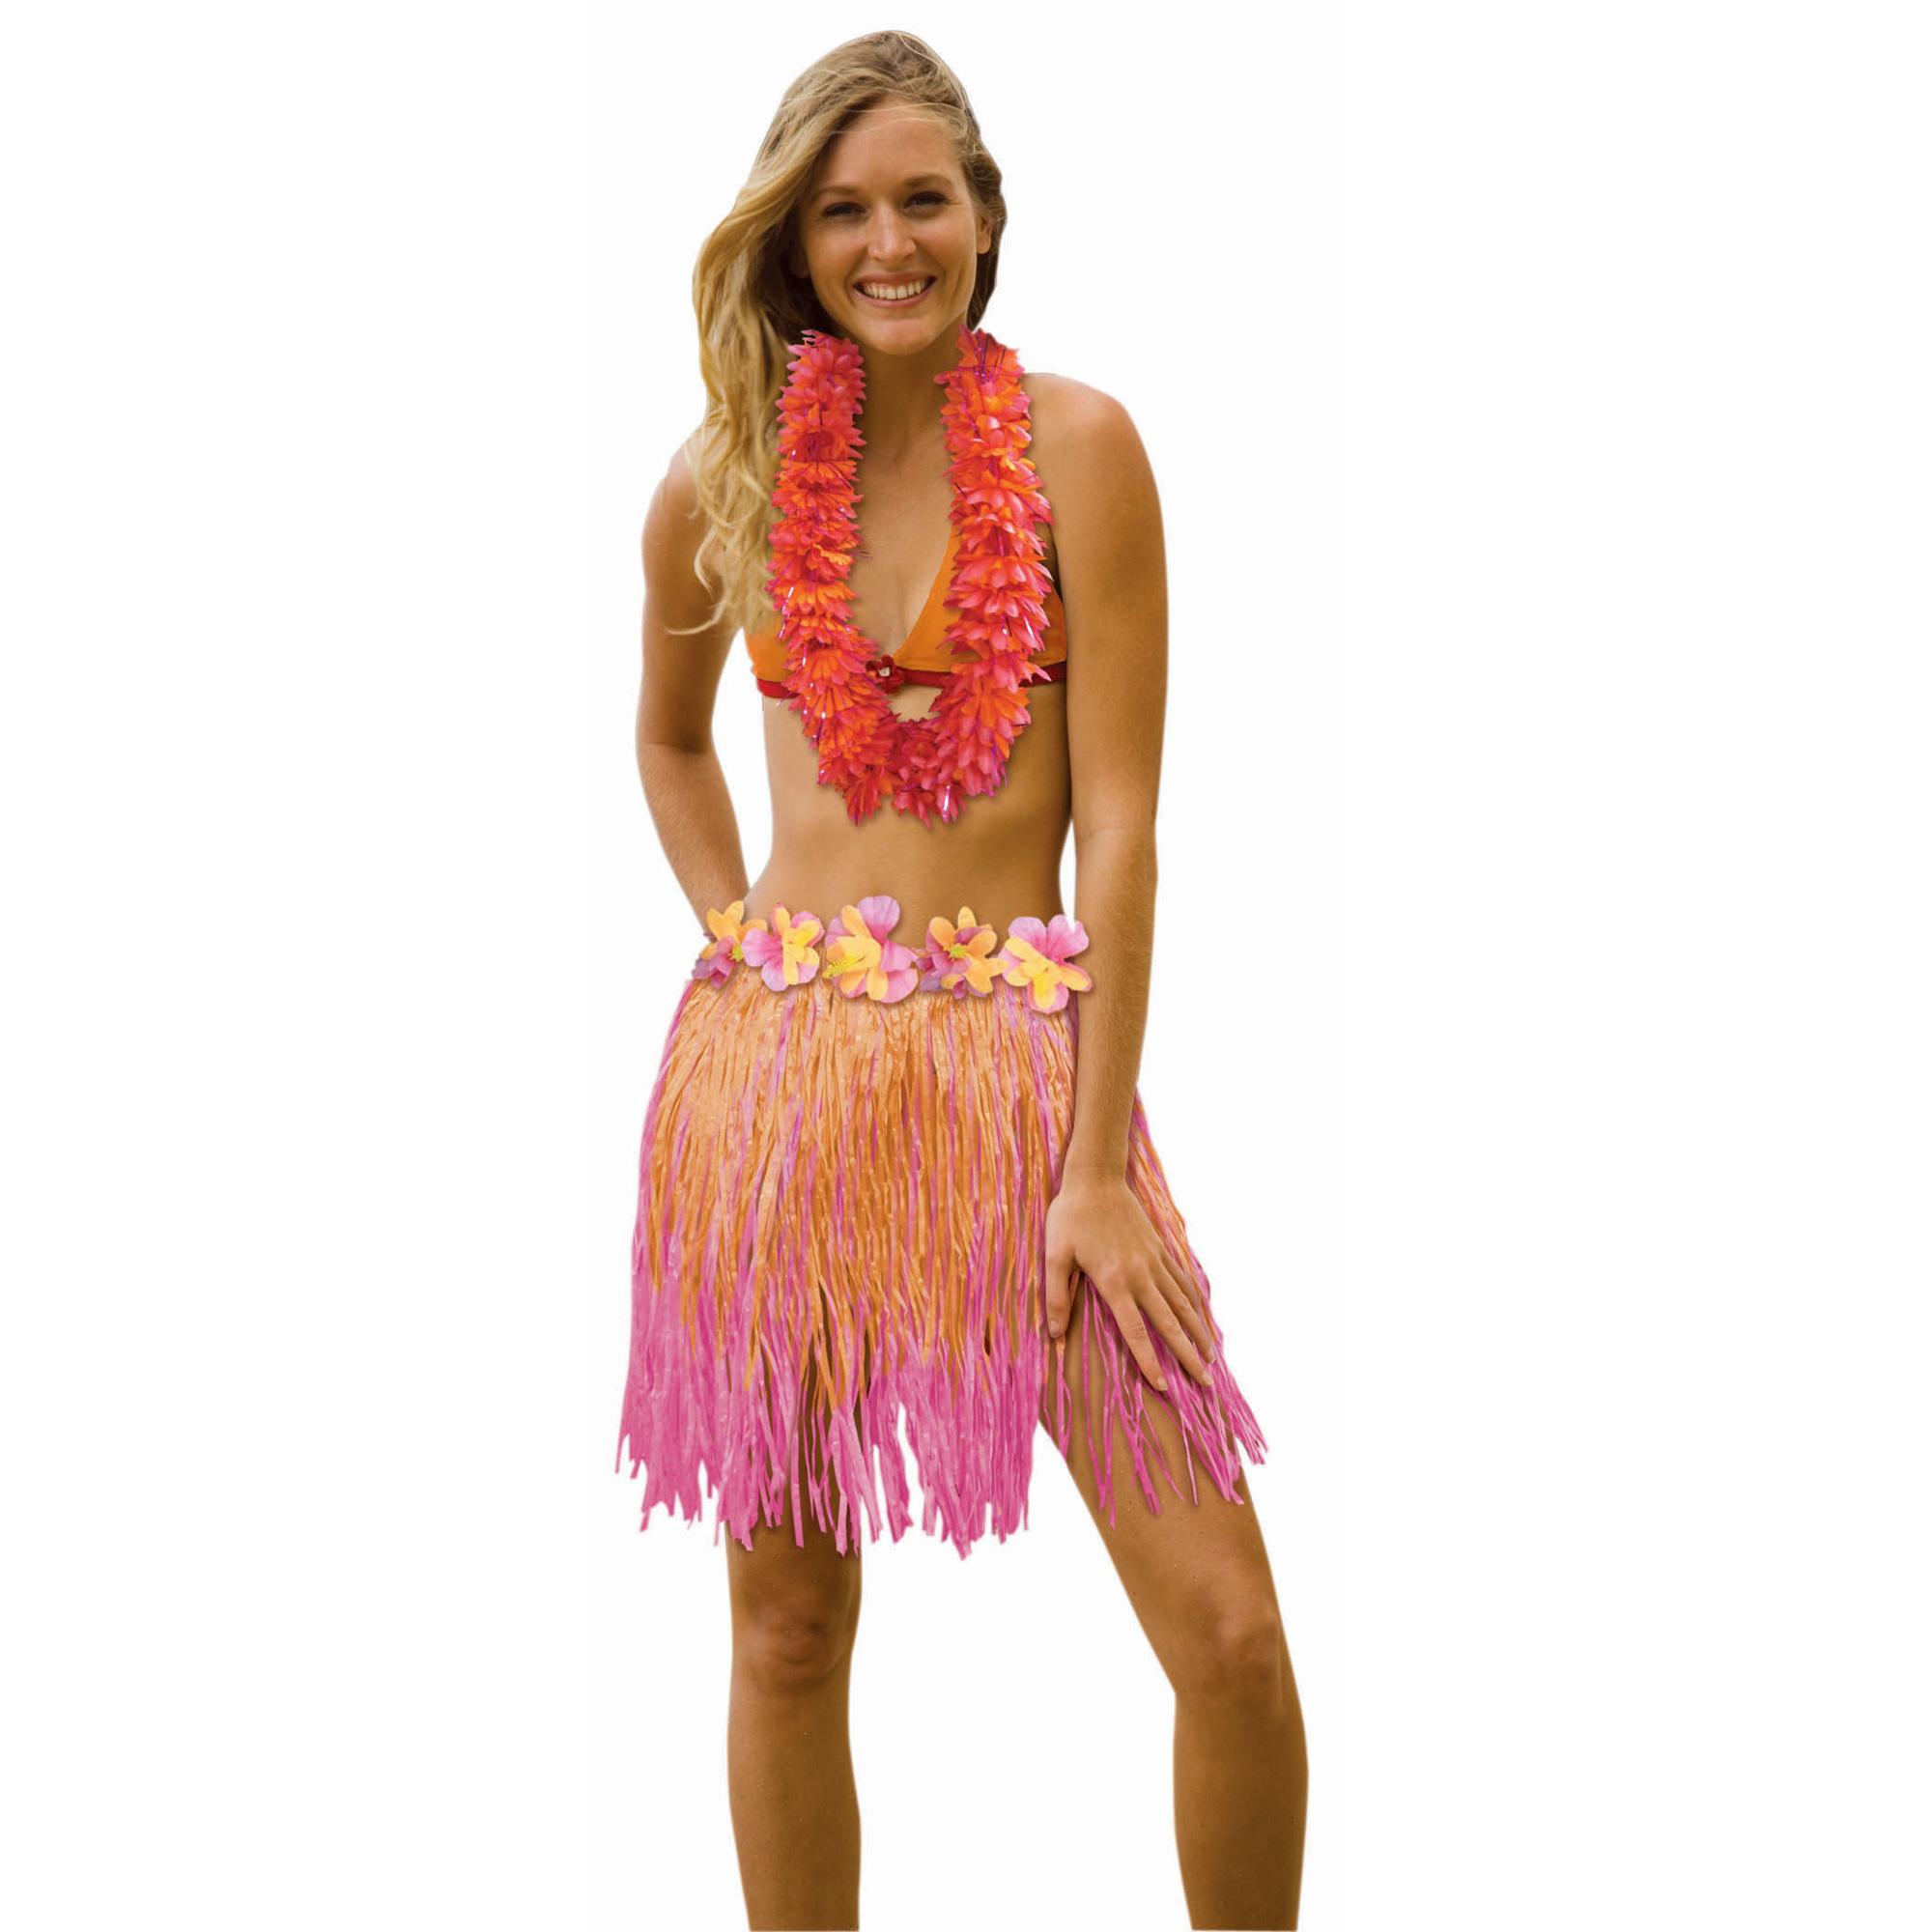 18 x 31in Pink & Orange Hula Skirt 18 x 31in Costumes & Apparel - Party Centre - Party Centre